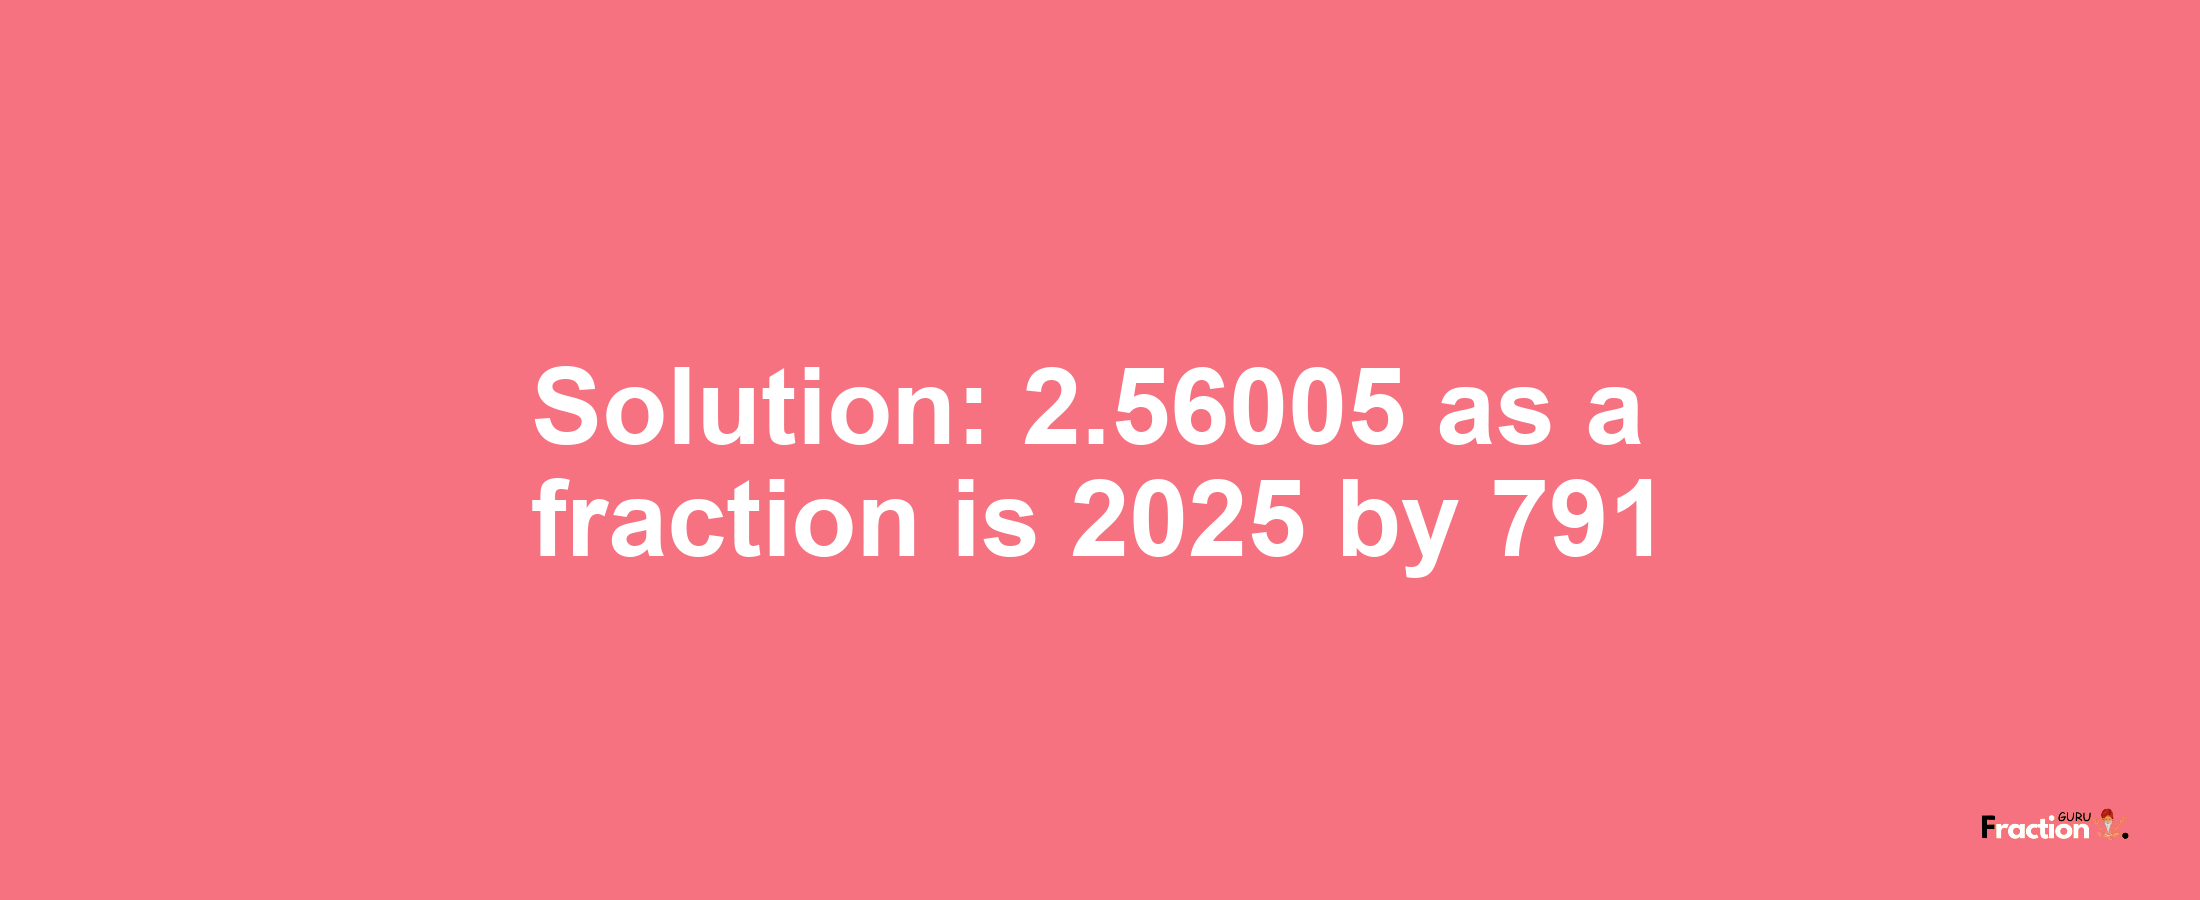 Solution:2.56005 as a fraction is 2025/791